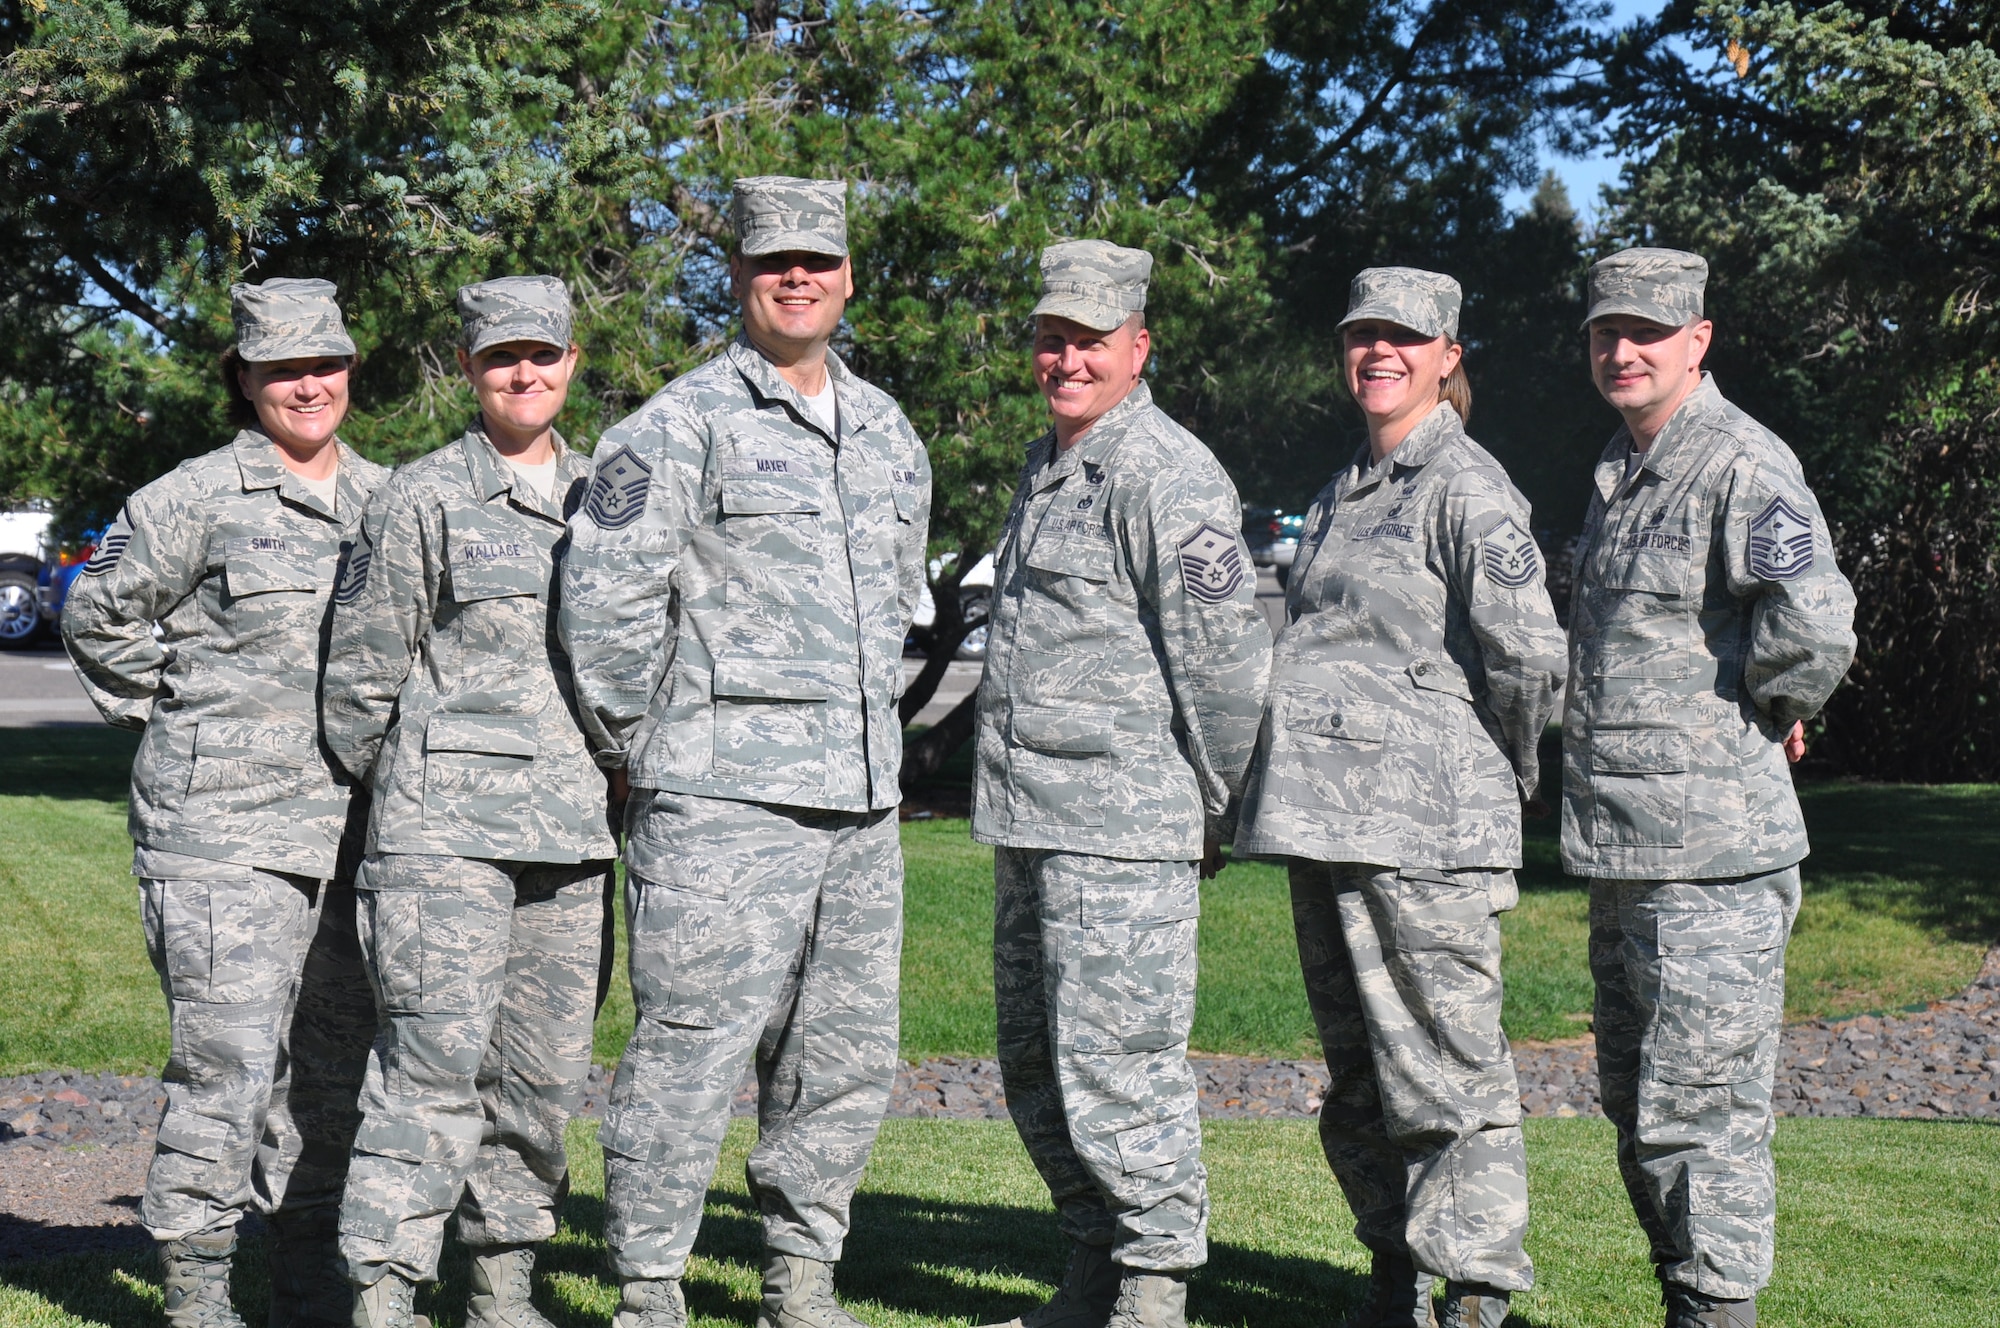 F. E. Warren Air Force Base’s diamond-wearing first sergeants pose for a photograph at the base golf course, July 19, prior to conducting a first sergeant council meeting. Warren’s diamond-wearing first sergeants are: Master Sgt. Nicole Smith, 90th Maintenance Group; Master Sgt. Tracy Wallace, 90th Civil Engineer Squadron; Master Sgt. Royal Maxey, 790th Missile Security Forces Squadron; Master Sgt. Todd Meaney, 90th Medical Group; Master Sgt. Faith McNelly, 30th Airlift Squadron; and Senior Master Sgt. Shawn Swidecki, 90th Operations Group. Not pictured: Master Sgt. Gearold Crouse, 90th Missile Security Forces Squadron; Master Sgt. Lloyd Hargis, 90th Logistics Readiness Squadron; Master Sgt. Daniel Flint, 90th Force Support Squadron. (U.S. Air Force photo by Senior Airman Mike Tryon)